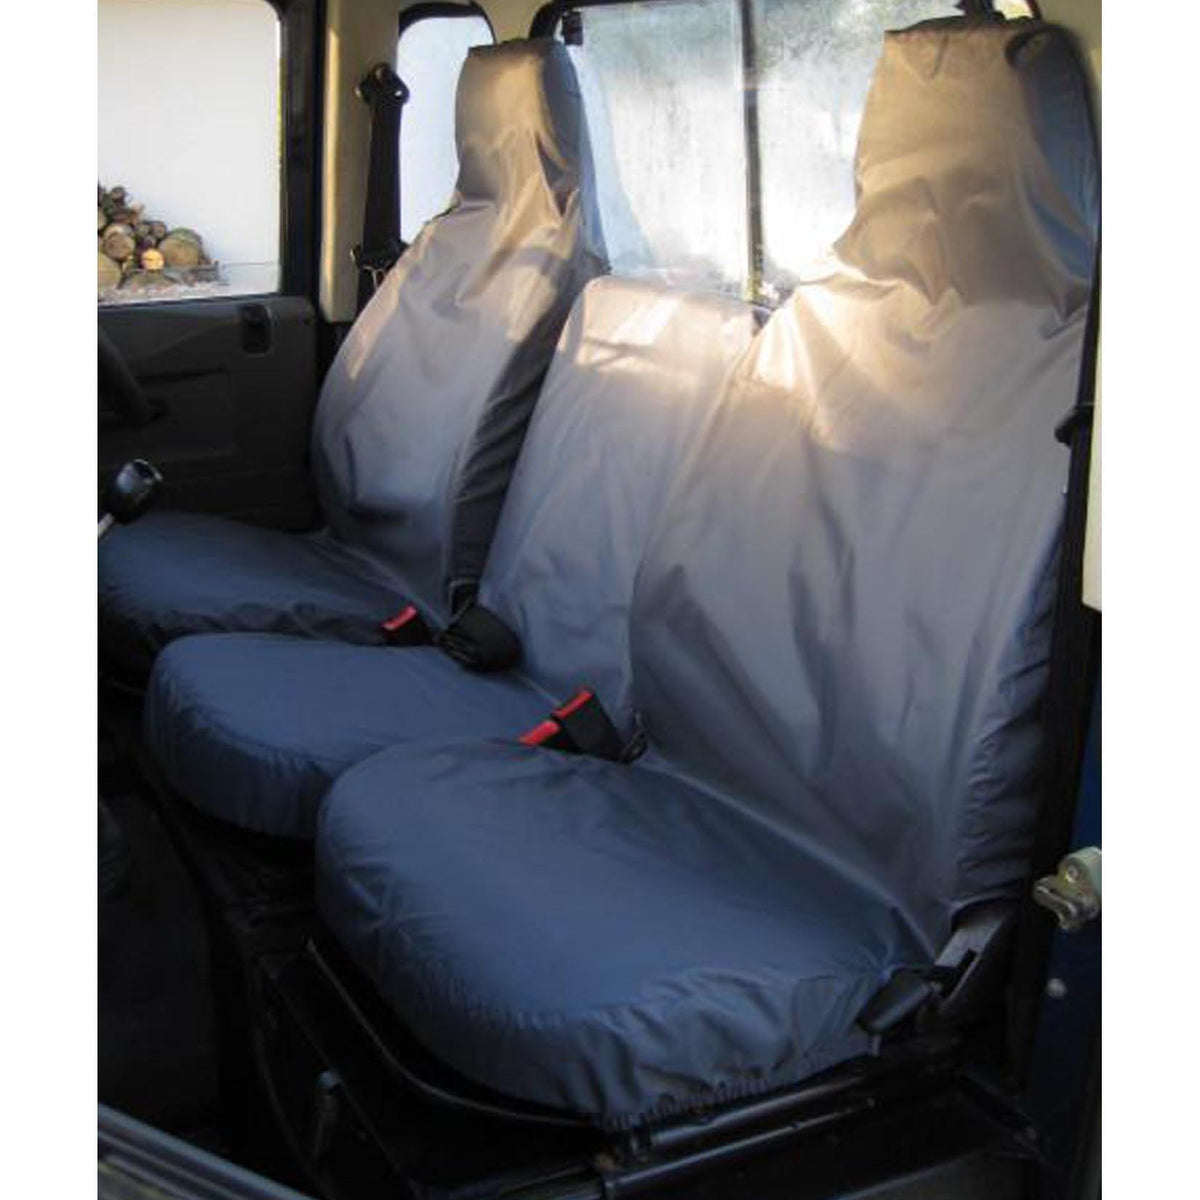 LAND ROVER DEFENDER 90 / 110 - 1983-1997 3 FRONT SINGLE SEAT COVERS - GREY - Storm Xccessories2